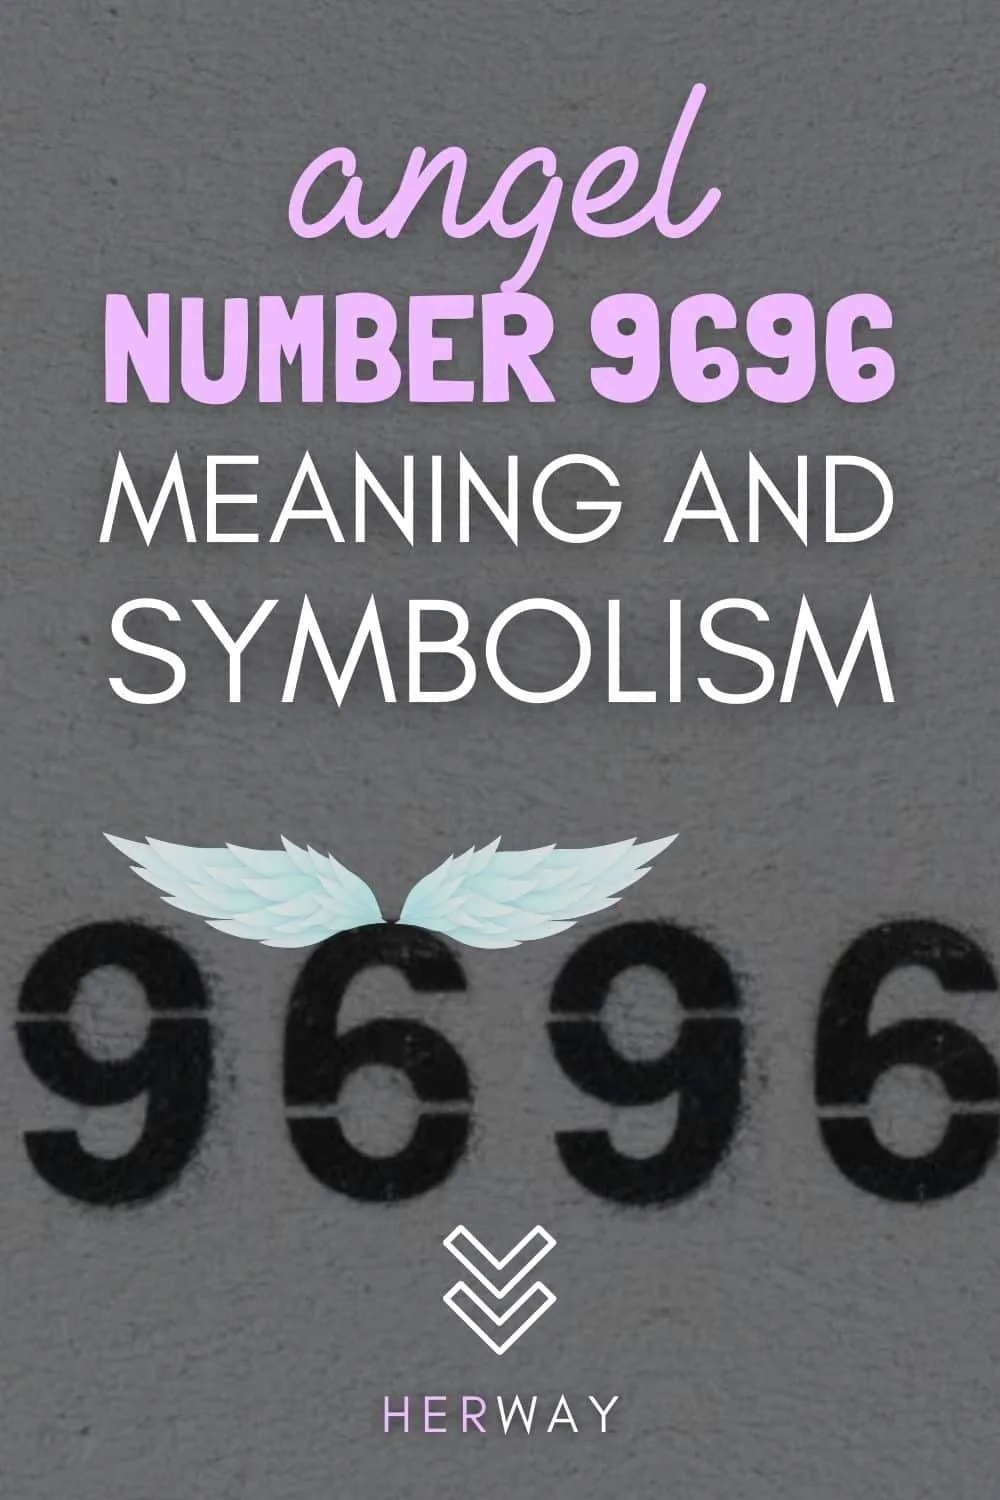 9696 Angel Number Meaning And 5 Reasons Why You Keep Seeing It Pinterest